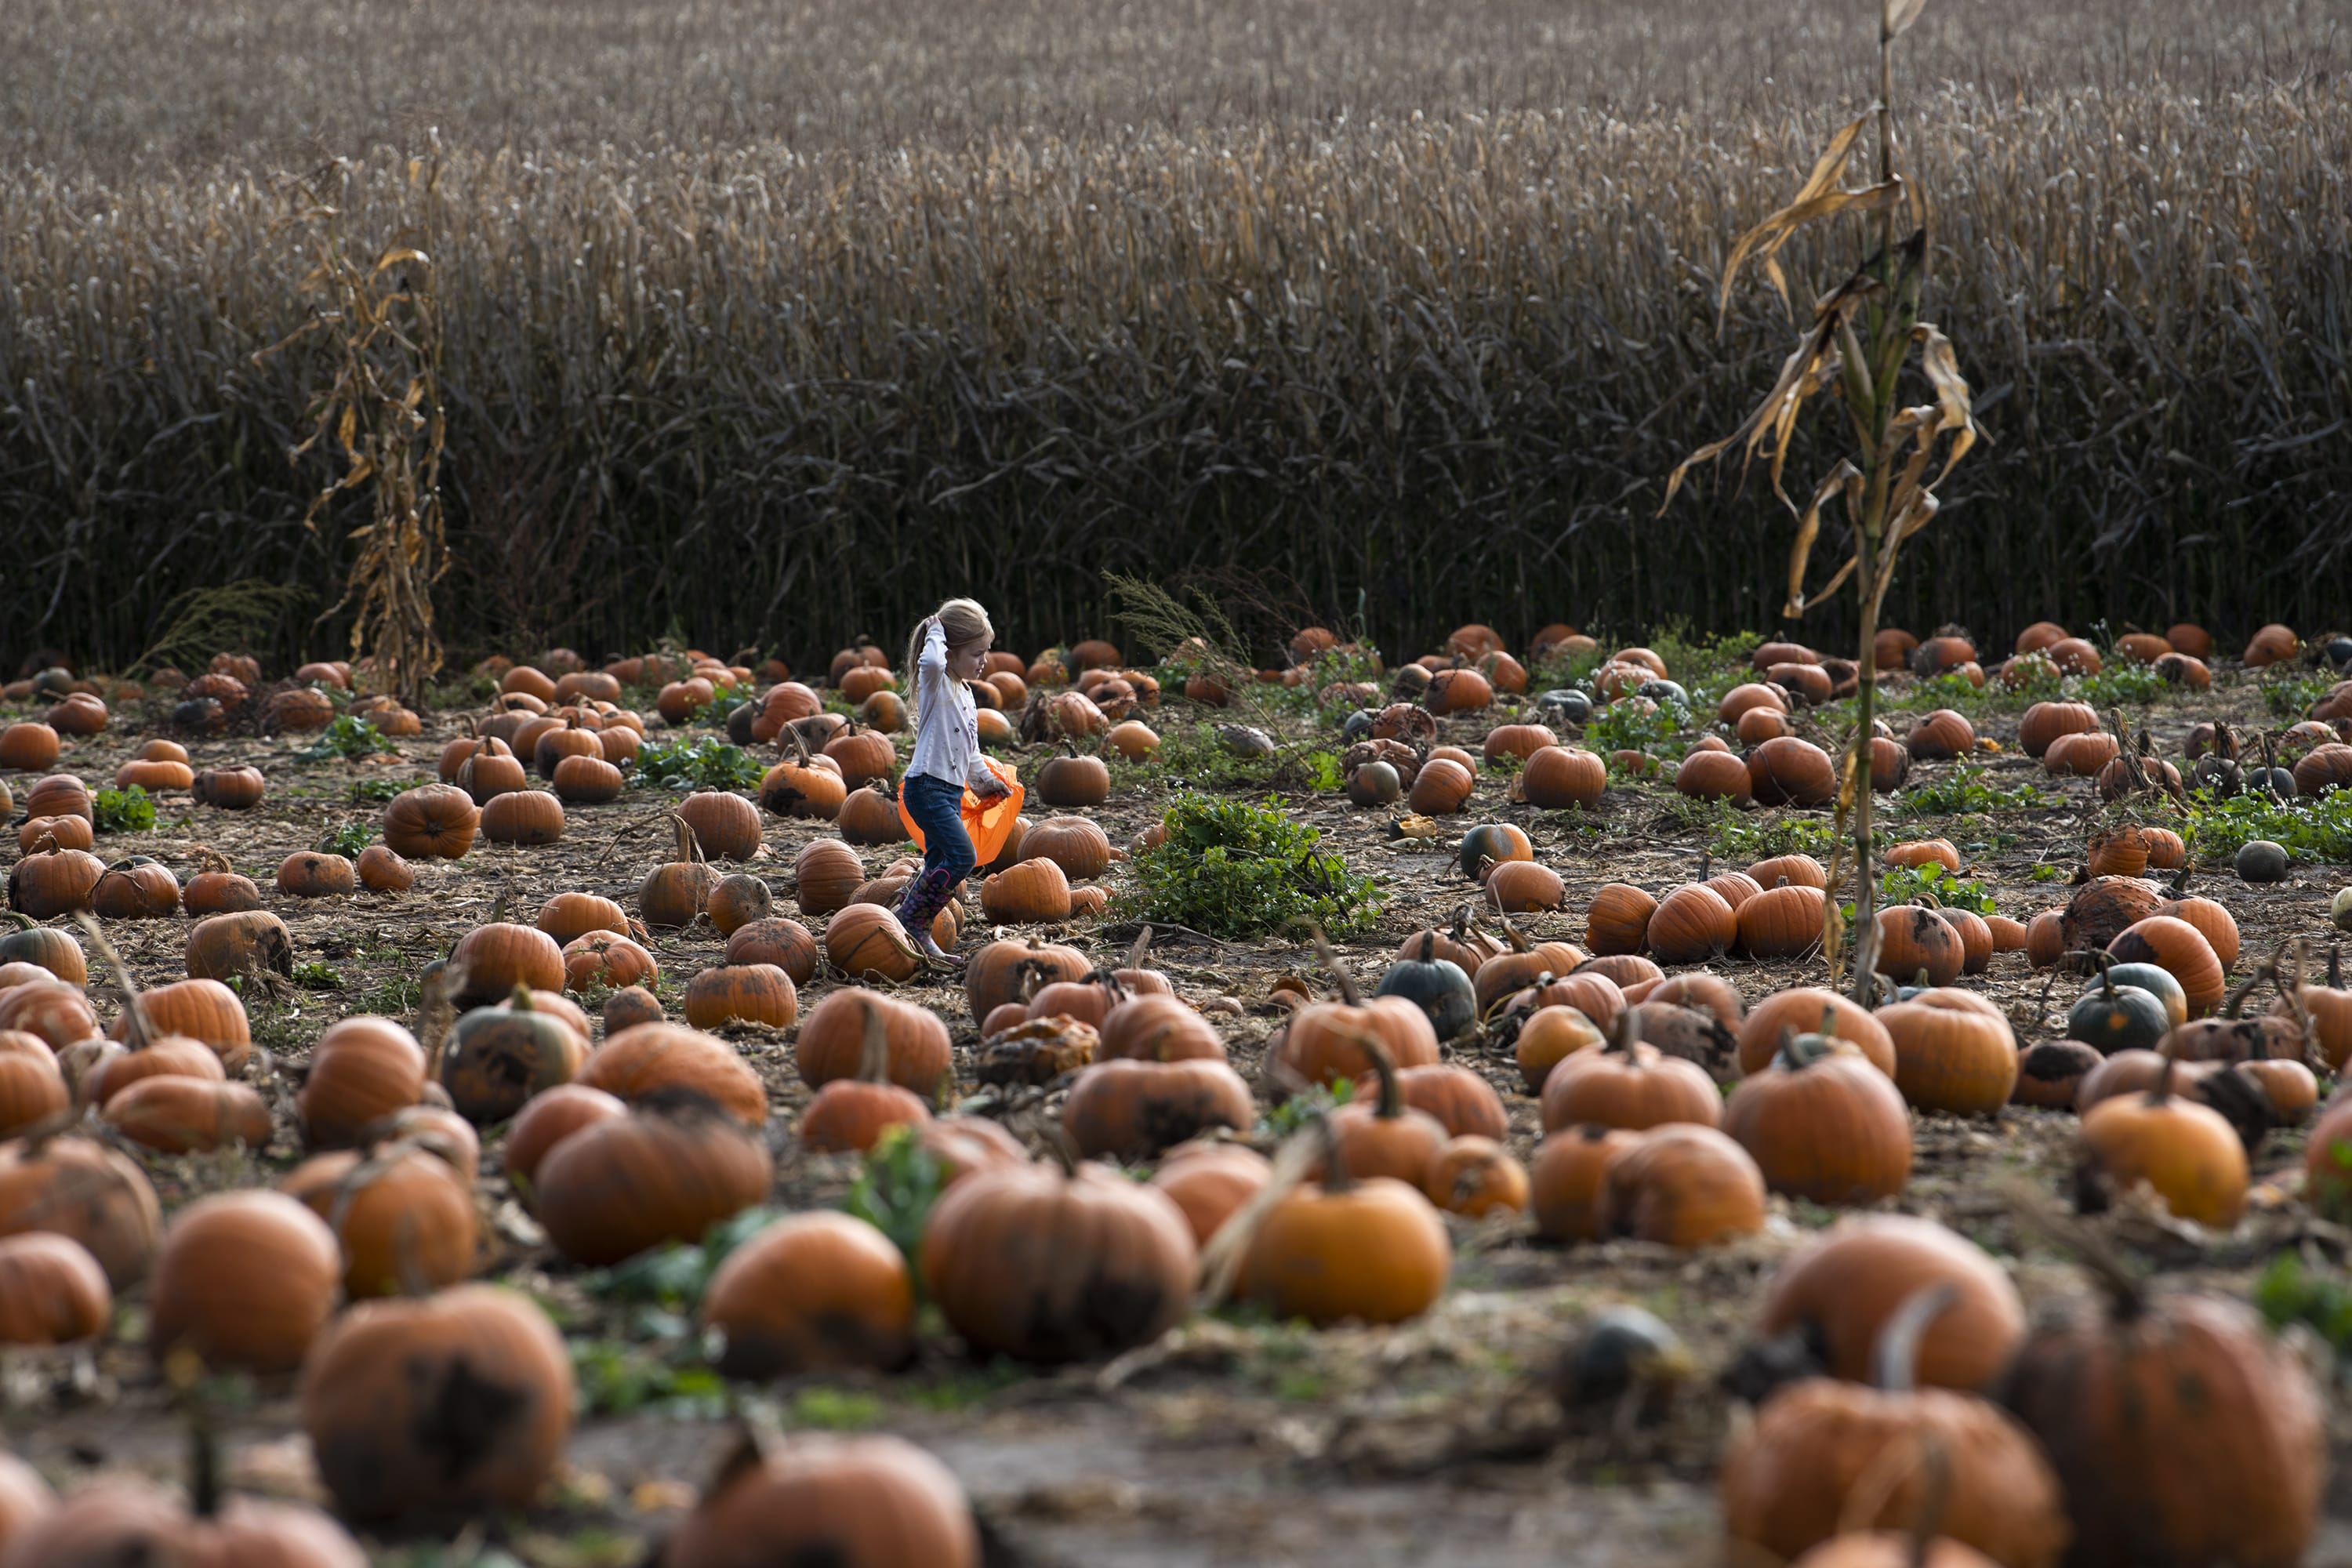 Ellsworth Elementary School kindergartner Sarah Williams runs through the pumpkin patch during a school field trip to Bi-Zi Farms in Vancouver on Oct. 22, 2019. Every student got to pick out a pumpkin to bring home with them.